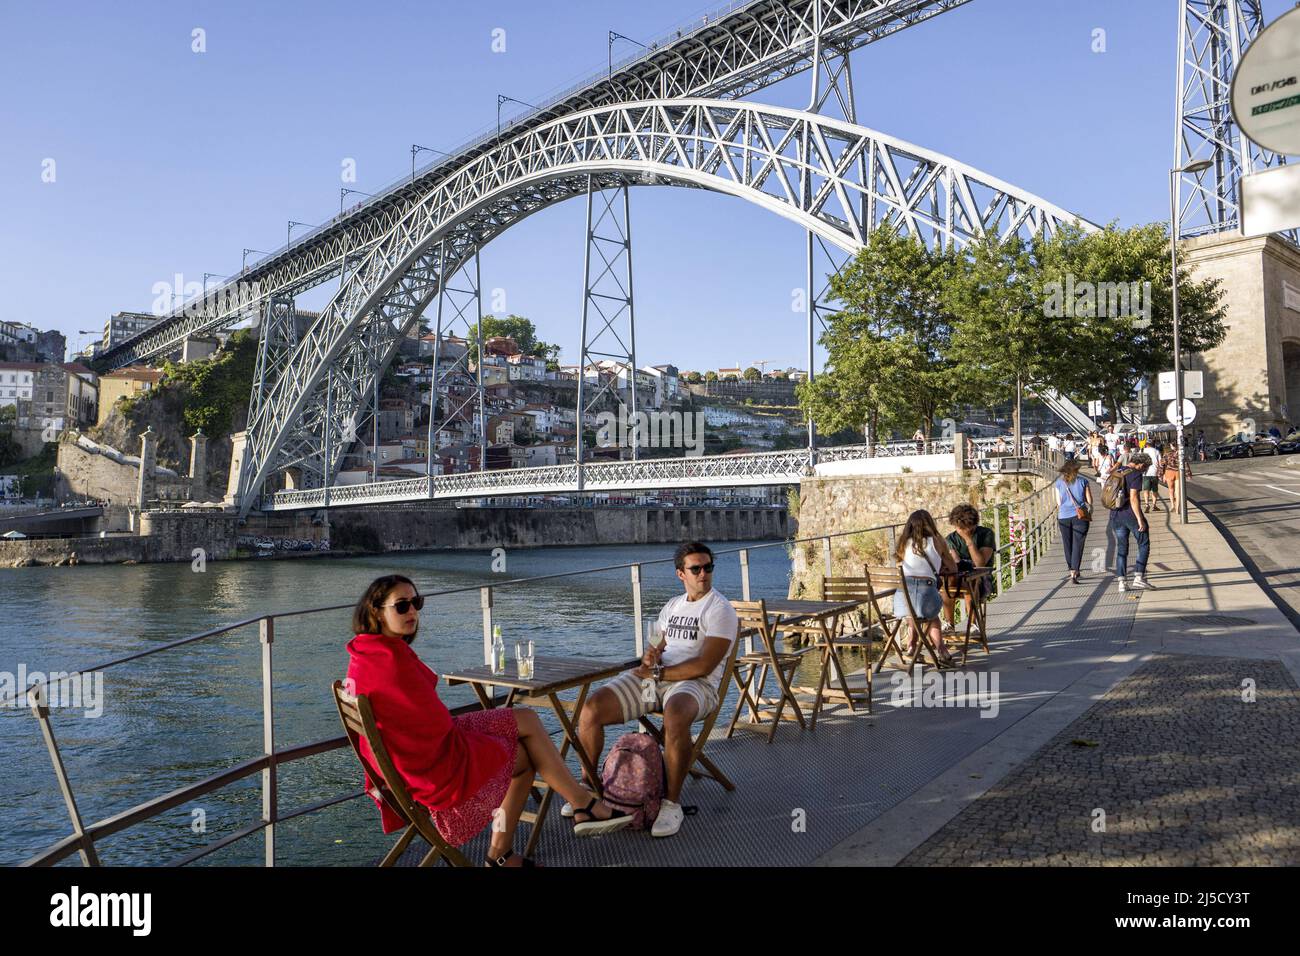 Portugal, Porto, 24.07.2020. Tourists on the river bank in Vila Nova de Gaia in Porto on 24.07.2020. The Luis I Bridge, also known as D. Luís I Bridge, is a truss arch bridge over the Douro River between Porto and Vila Nova de Gaia in Portugal. The construction of the bridge began in 1881 and was inaugurated on October 31, 1886 by King Louis I of Portugal (Dom Luís I), whose name it bears. [automated translation] Stock Photo